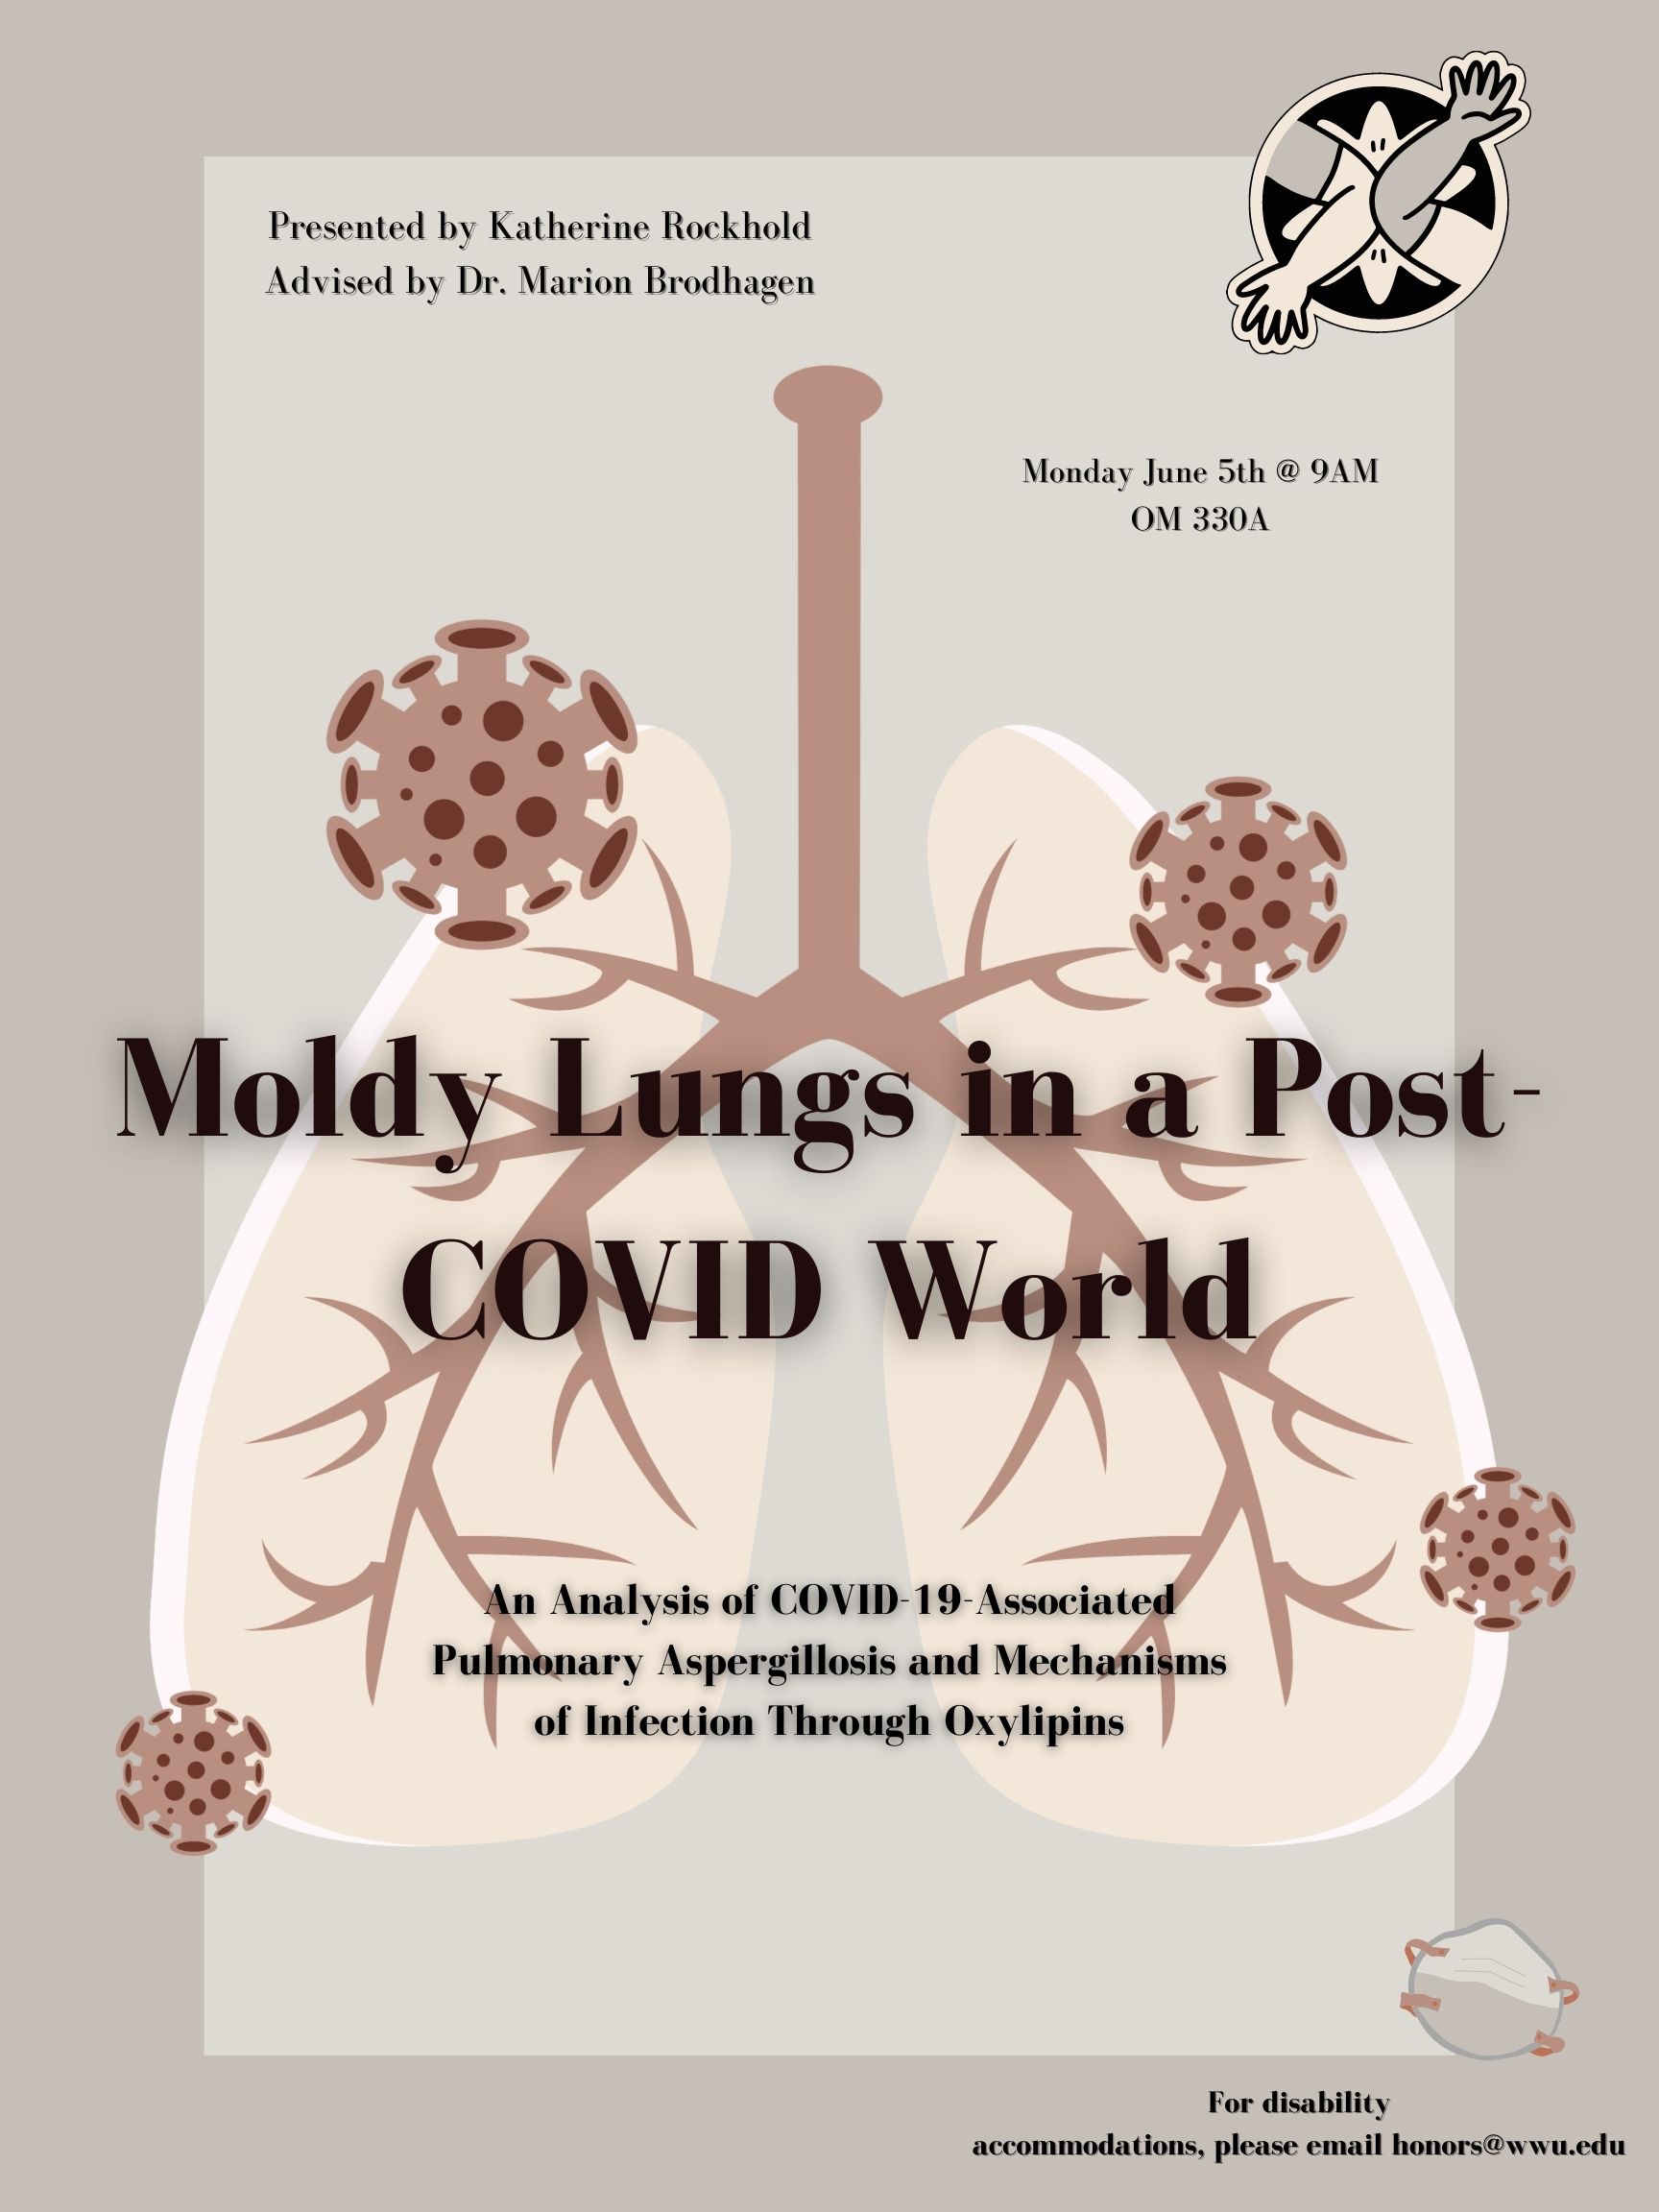 A poster with lungs surrounded by microbes on a gray background. Text reads: "Presented by Katherine Rockhold, Advised by Dr. Marion Brodhagen. Monday June 5th @ 9AM. Moldy Lungs in a Post-COVID World. An Analysis of COVID-19-Associated Pulmonary Aspergillosis and Mechanisms of Infection Through Oxylipins. For disability accommodations, please email honors@wwu.edu."